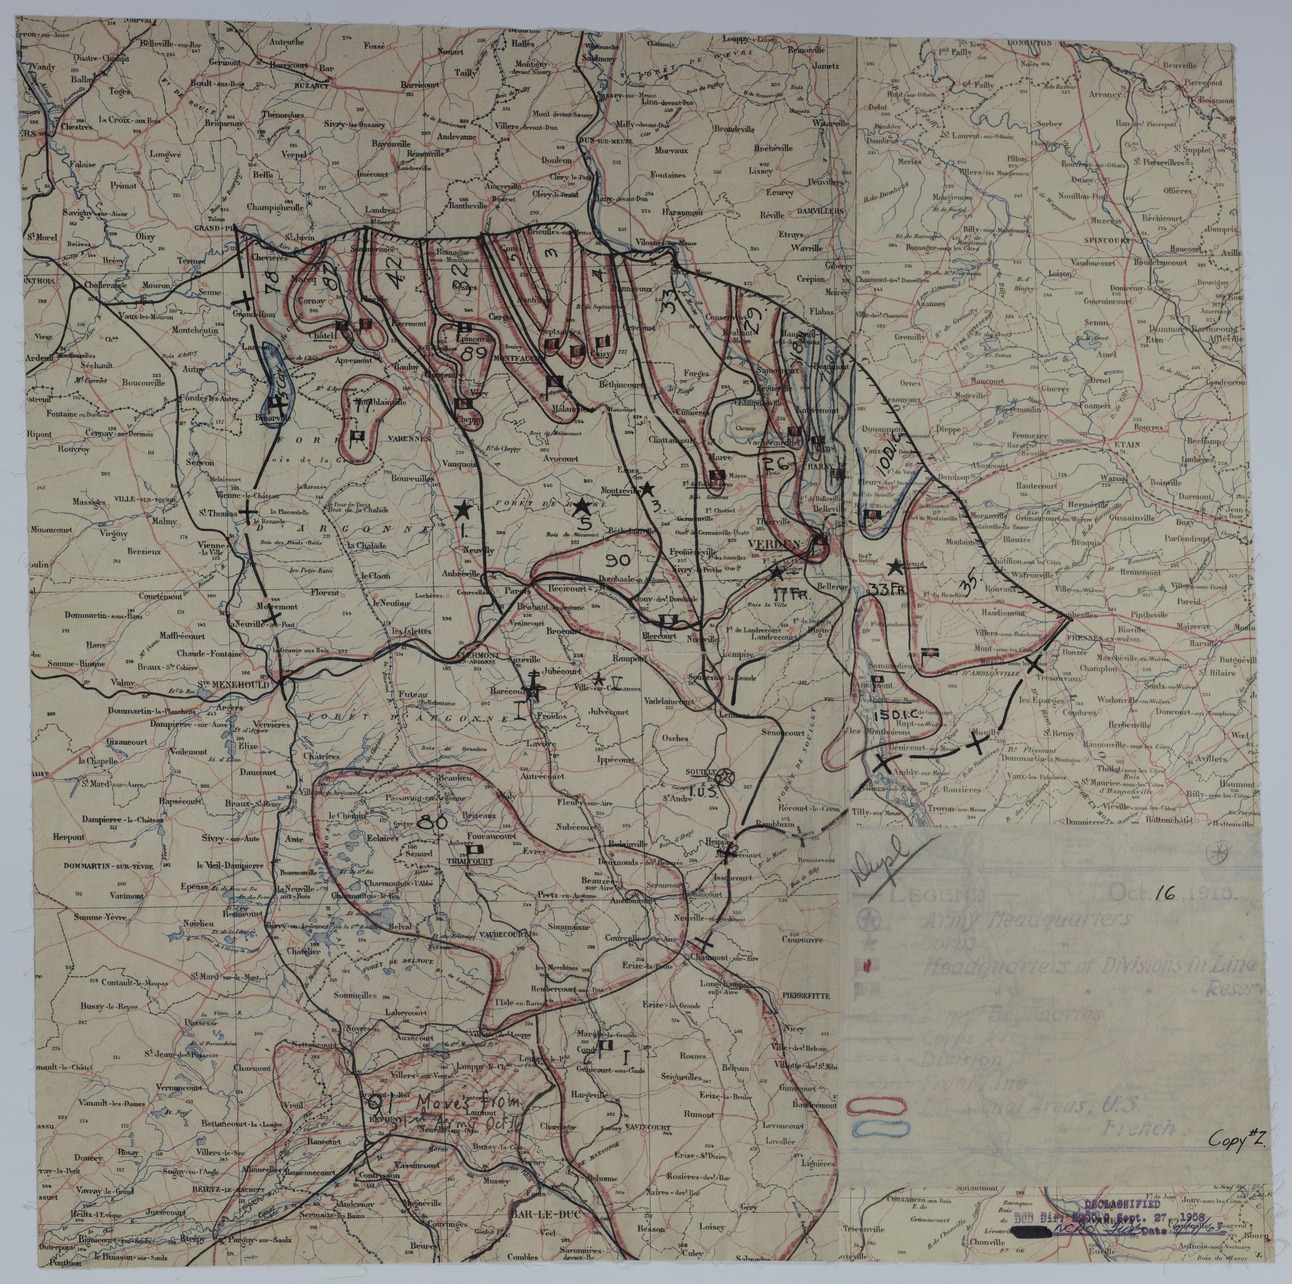 Map of Divisional Positions on October 16, 1918